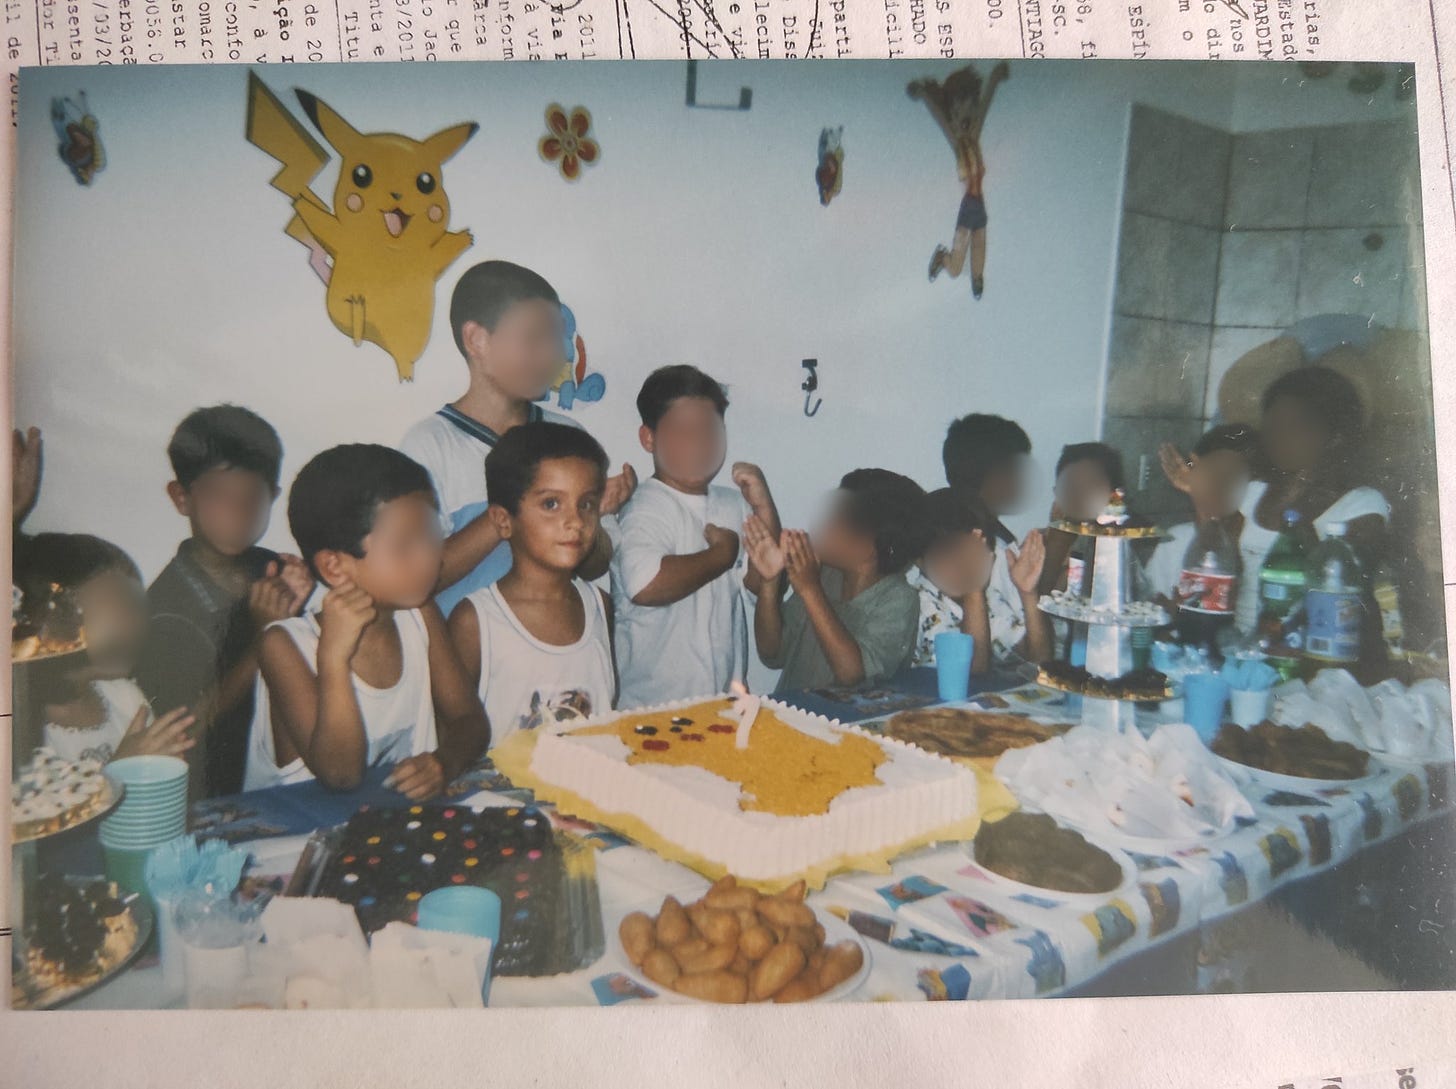 Rikki at his Pokémon-themed party on his seventh birthday in 1998. We are super jealous of that Pikachu cake!